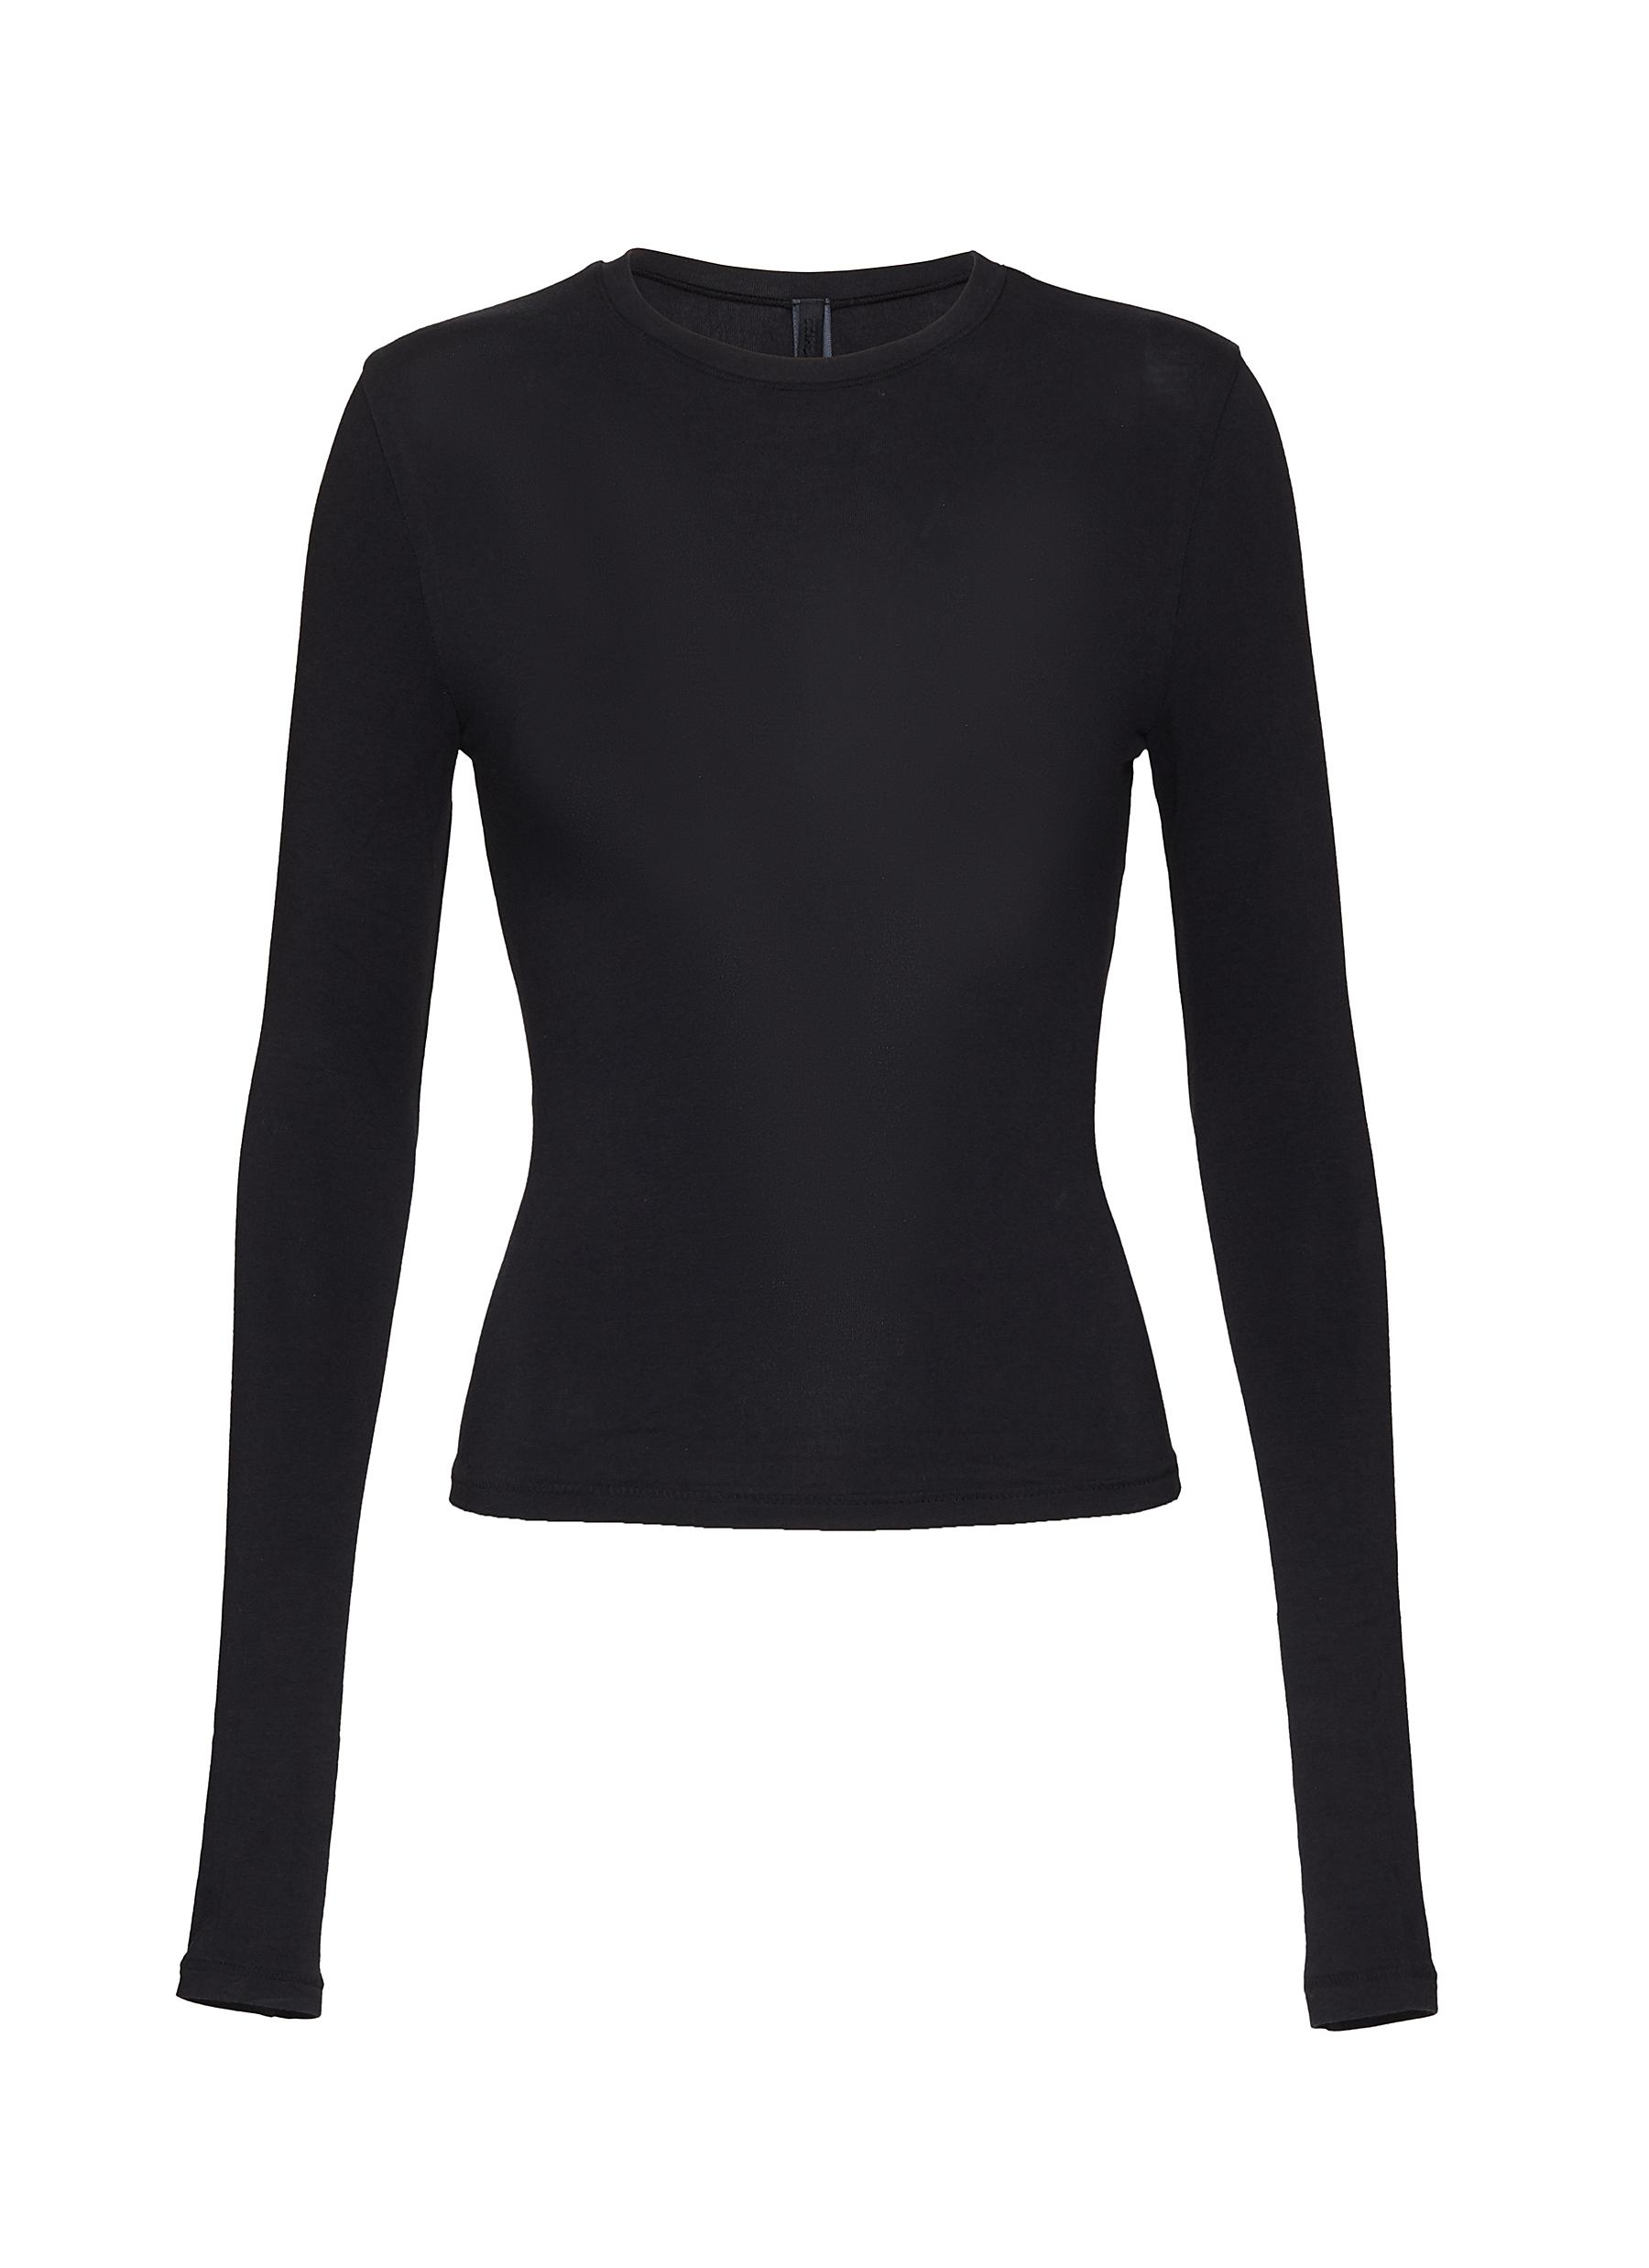 Balenciaga Fitted Spandex Long-Sleeve Top